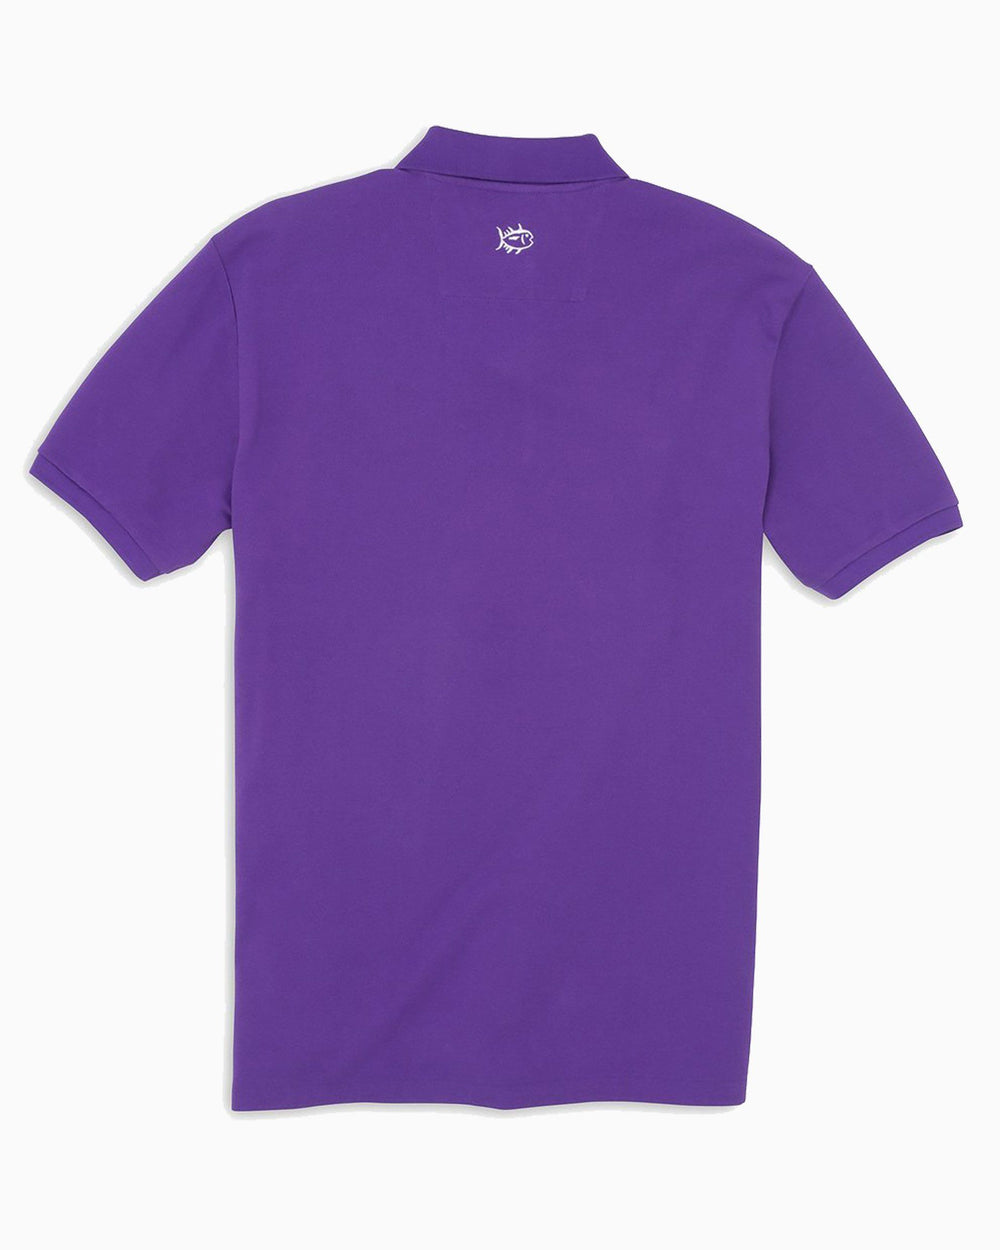 The back view of the Men's Purple Clemson Tigers Pique Polo Shirt by Southern Tide - Regal Purple